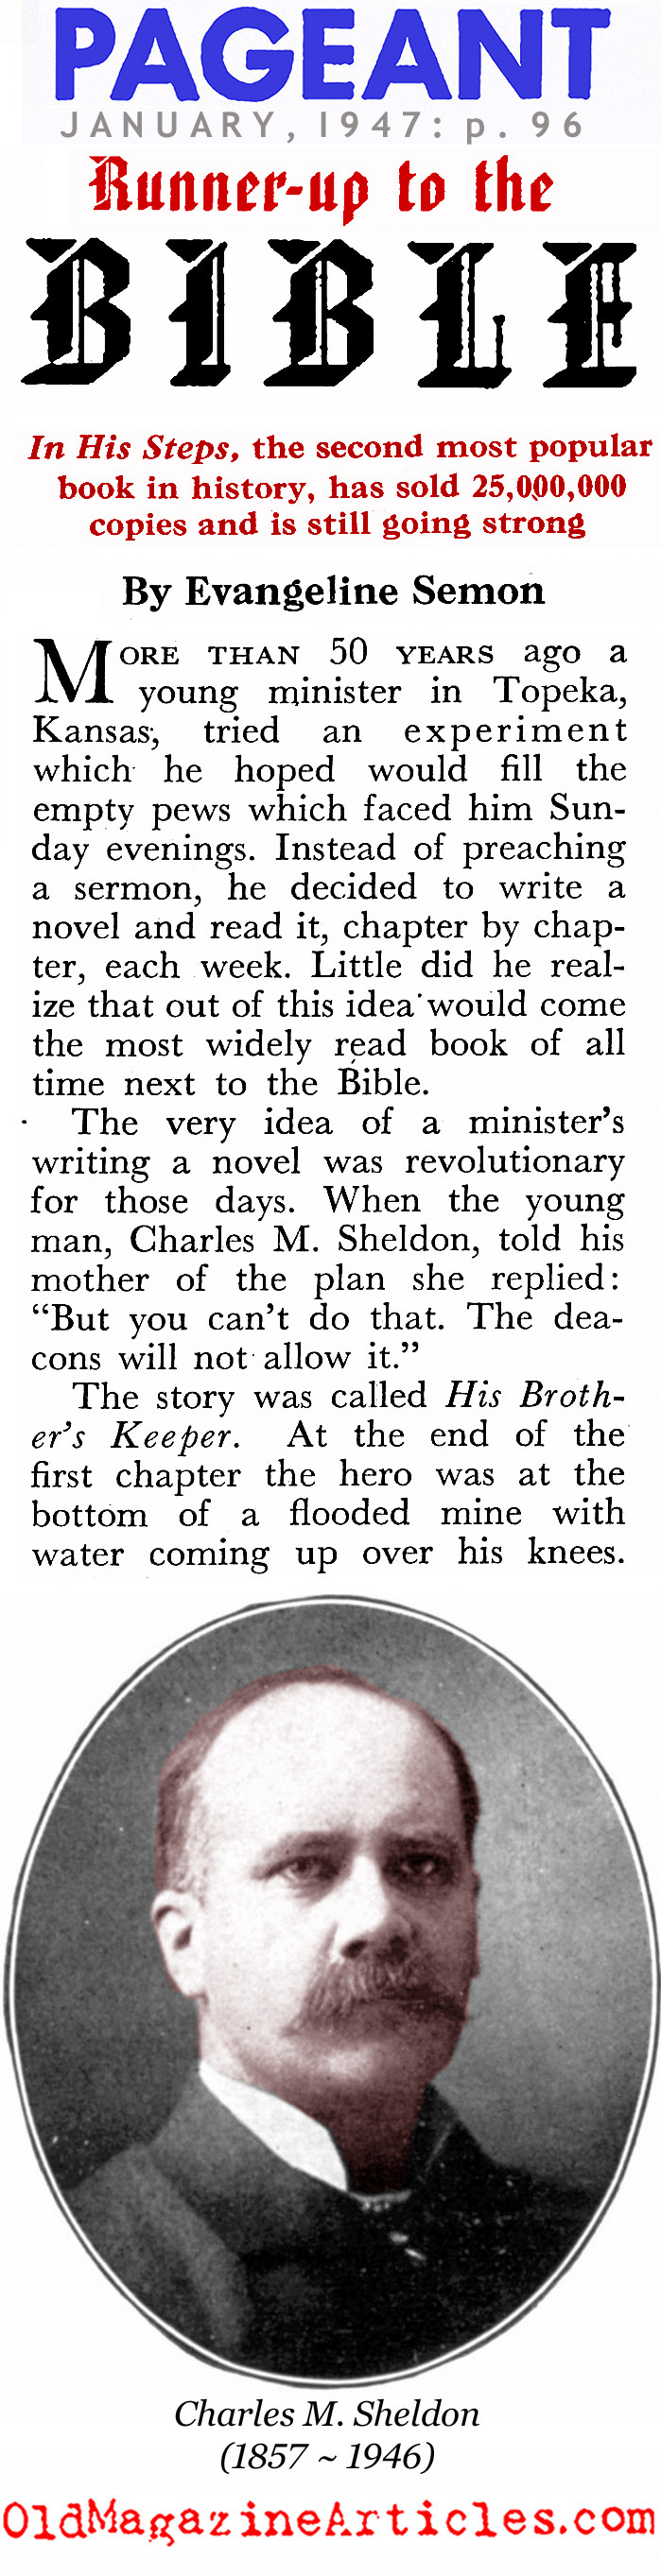 ''The Runner-Up to the Bible'' (Pageant Magazine, 1947)